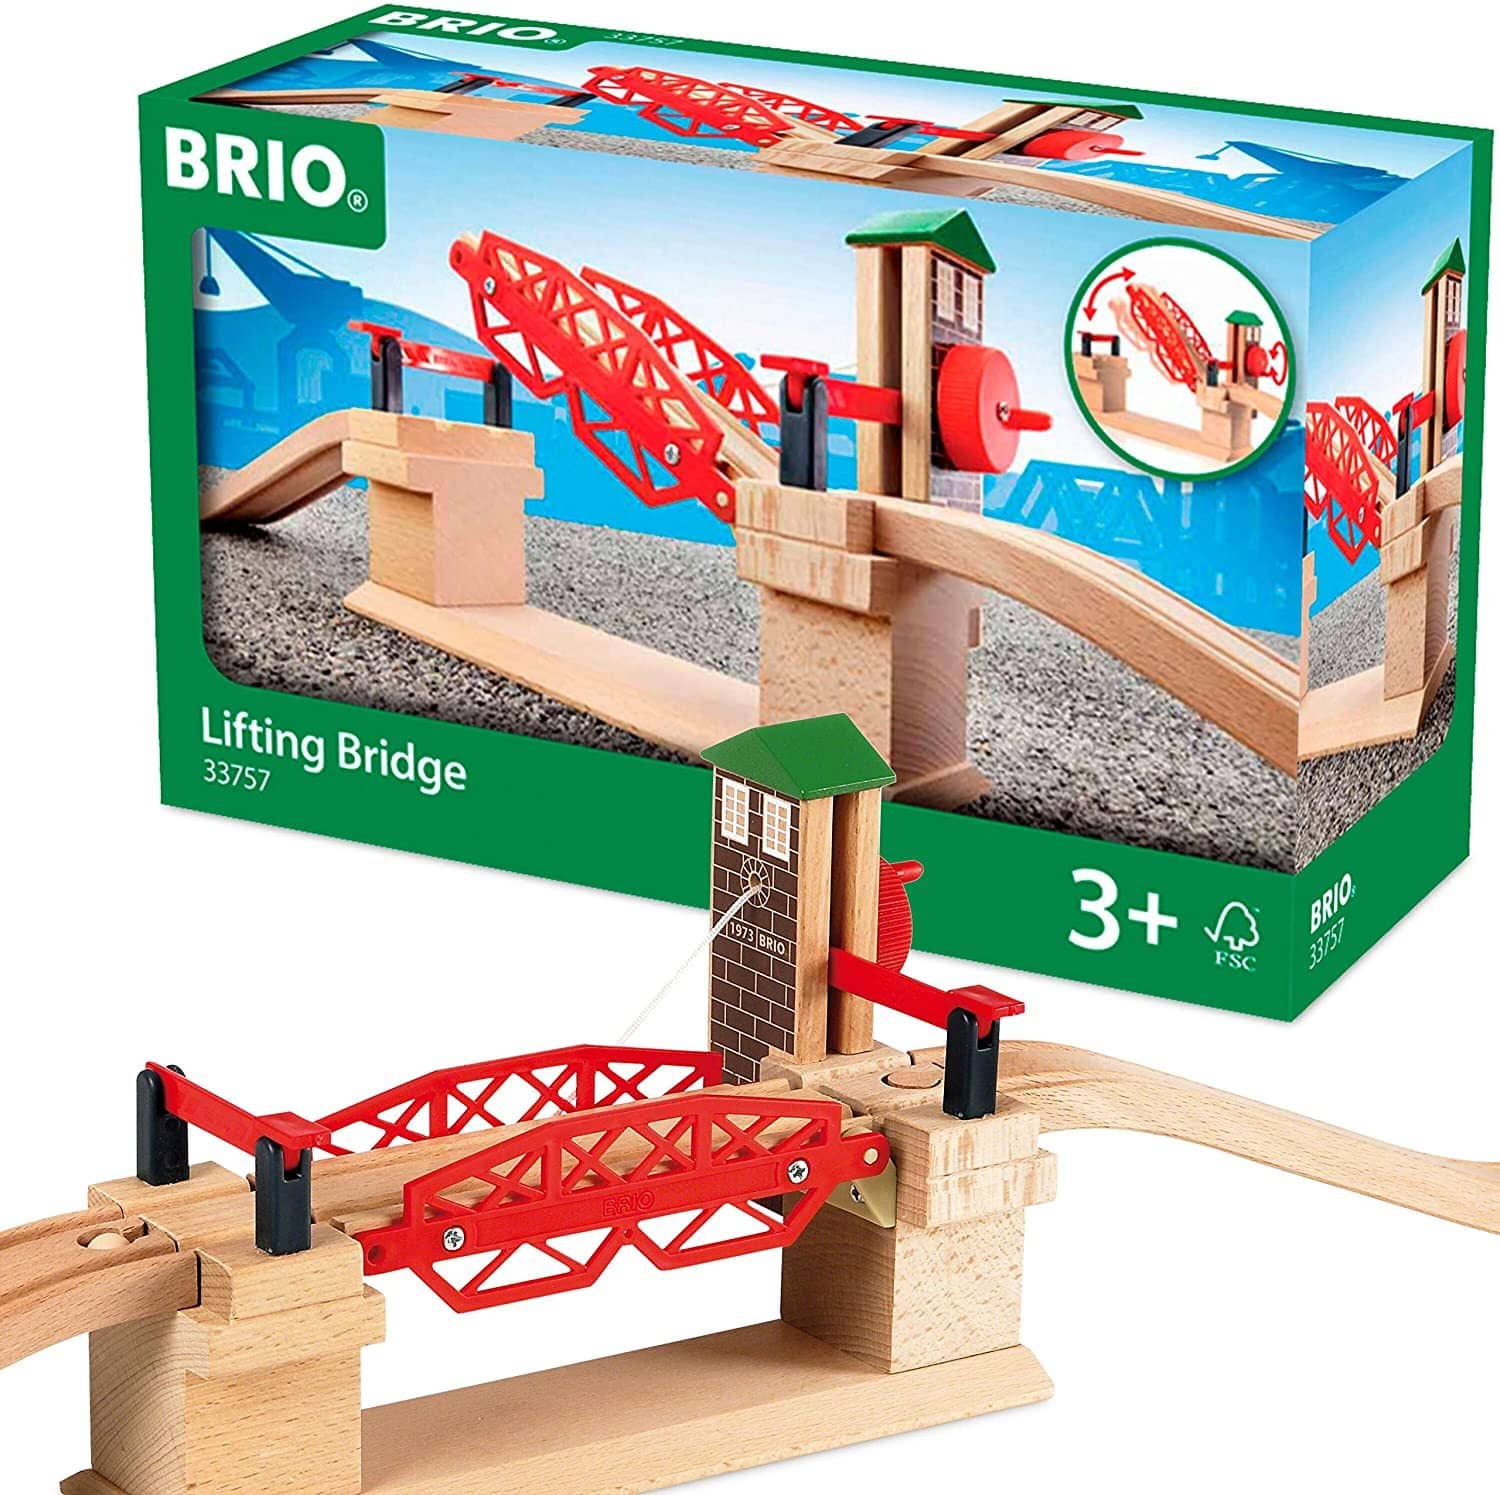 Brio 33757 Lifting Bridge | Toy Train Accessory With Wooden Track For Kids Age 3 And Up-Kidding Around NYC